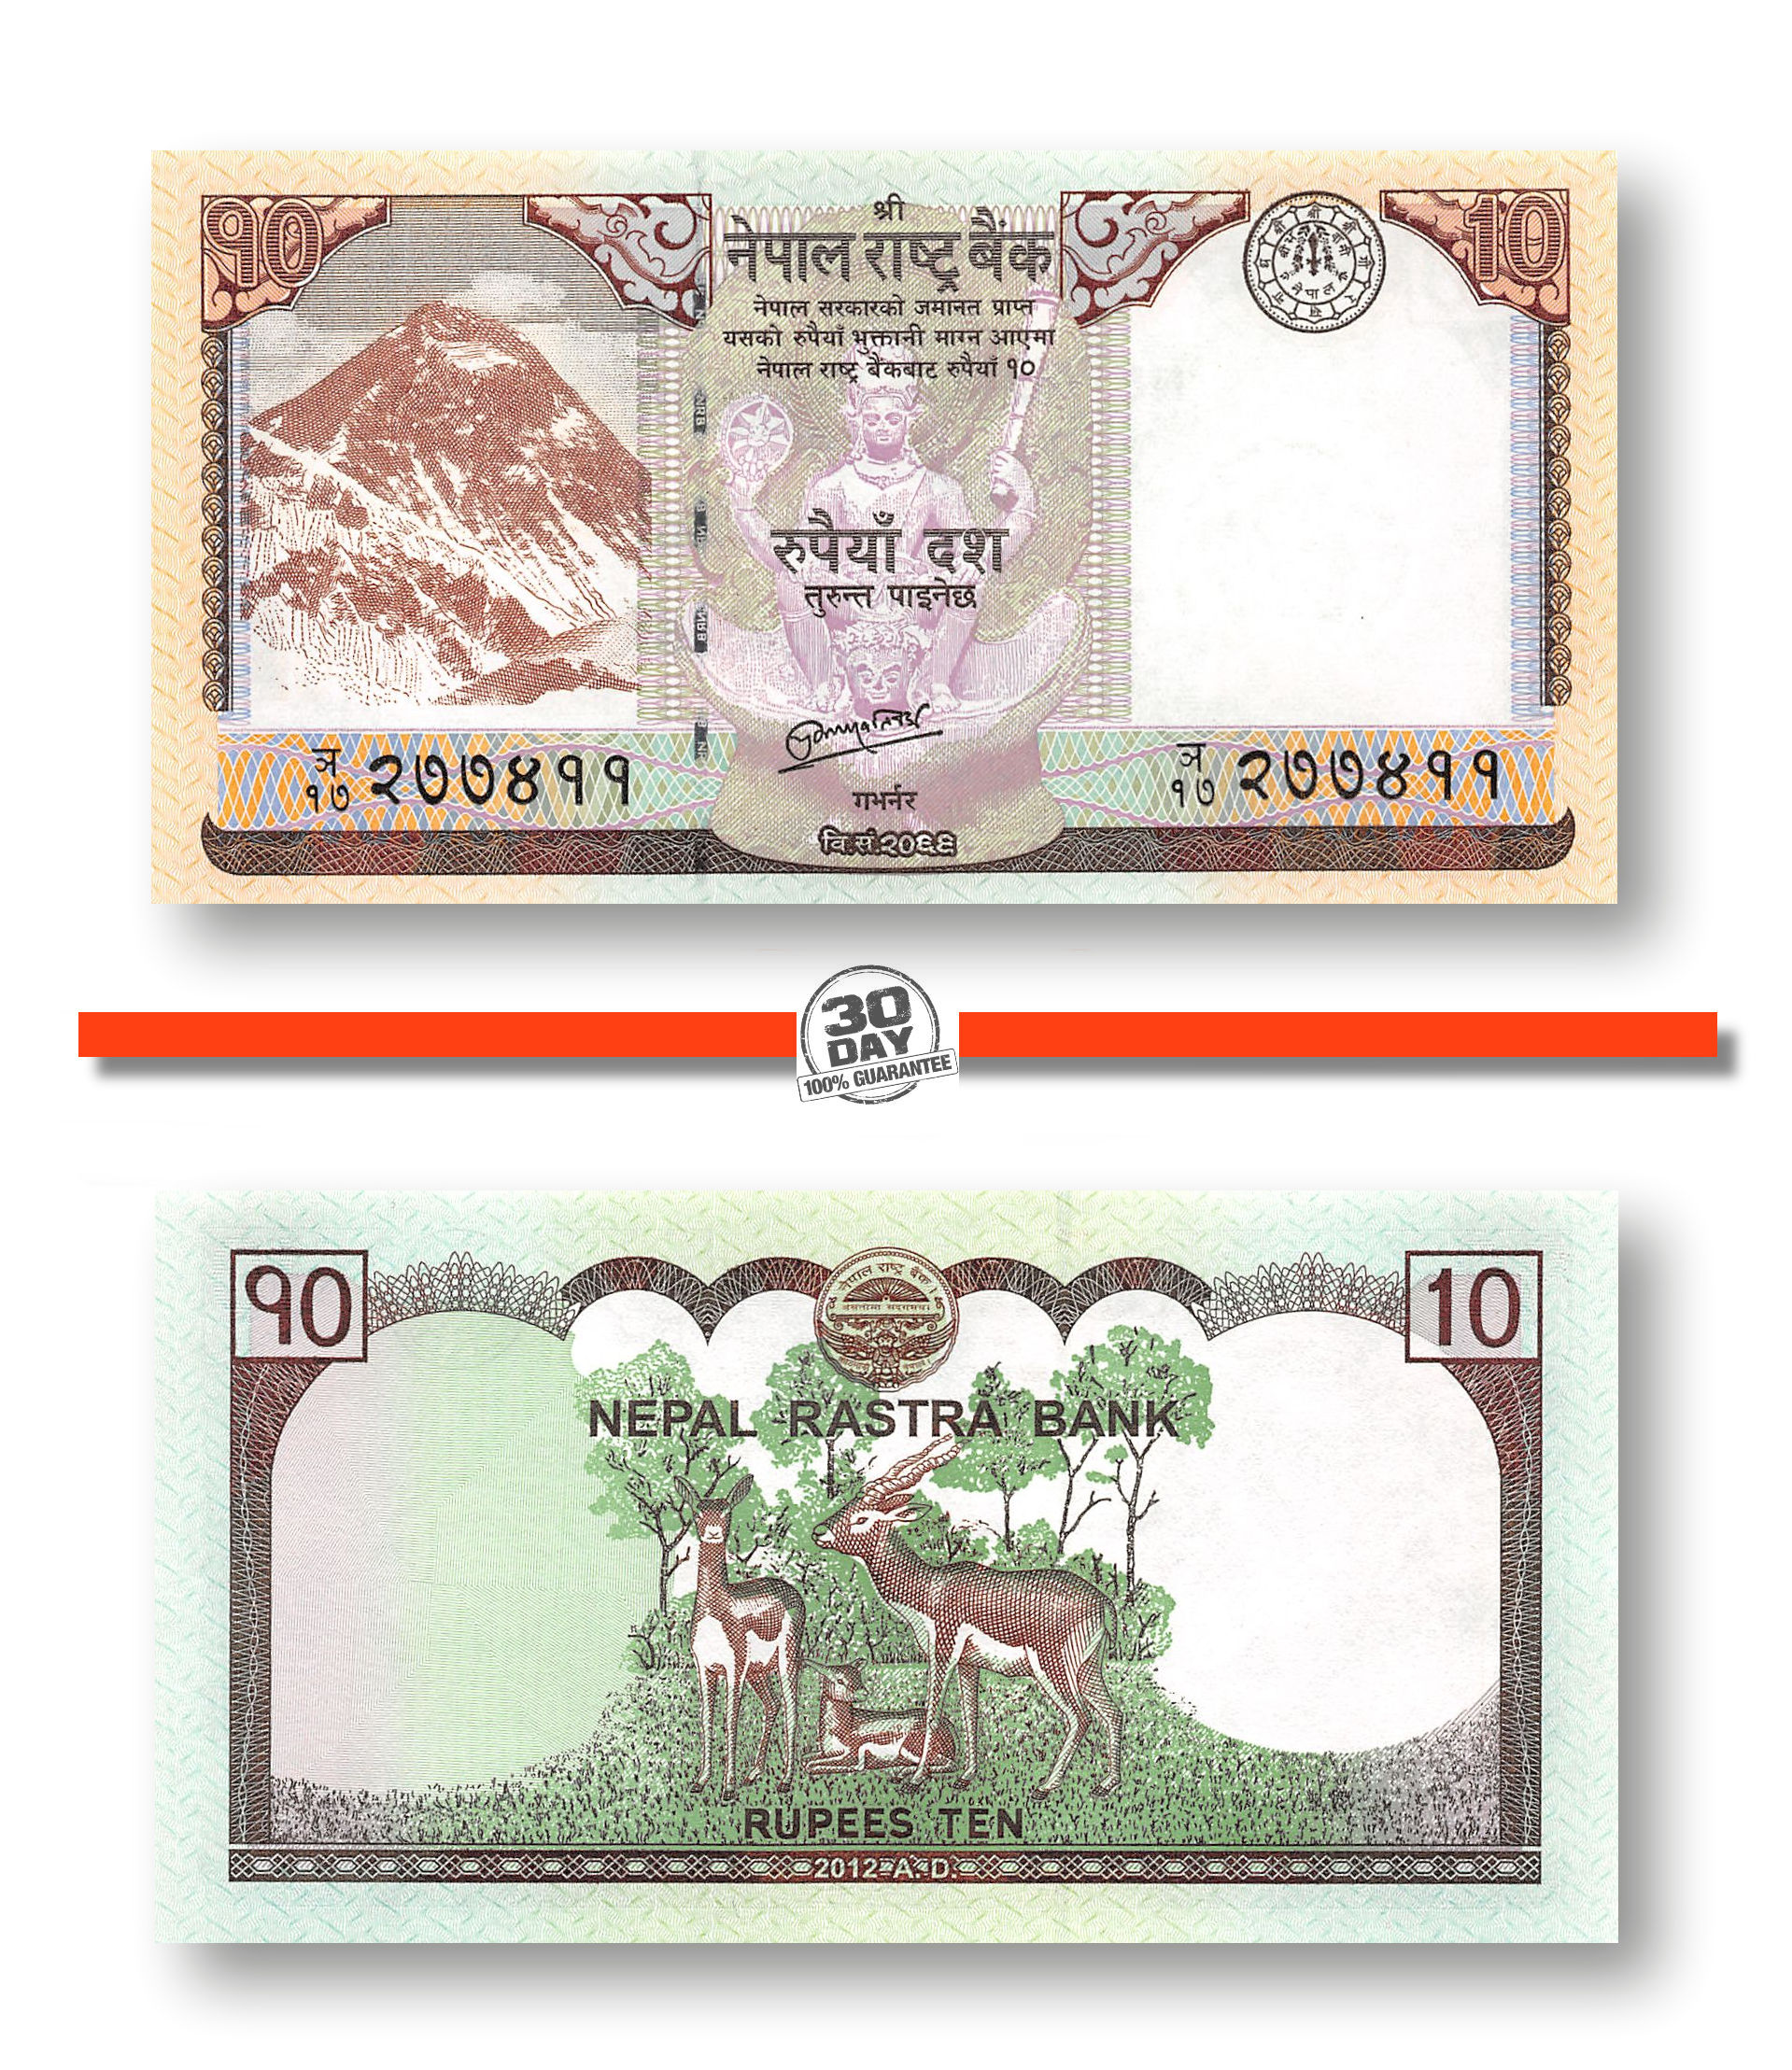 Details about   Money of Nepal ▶ P-70 2012 Note 10 rupees World Banknote unc 